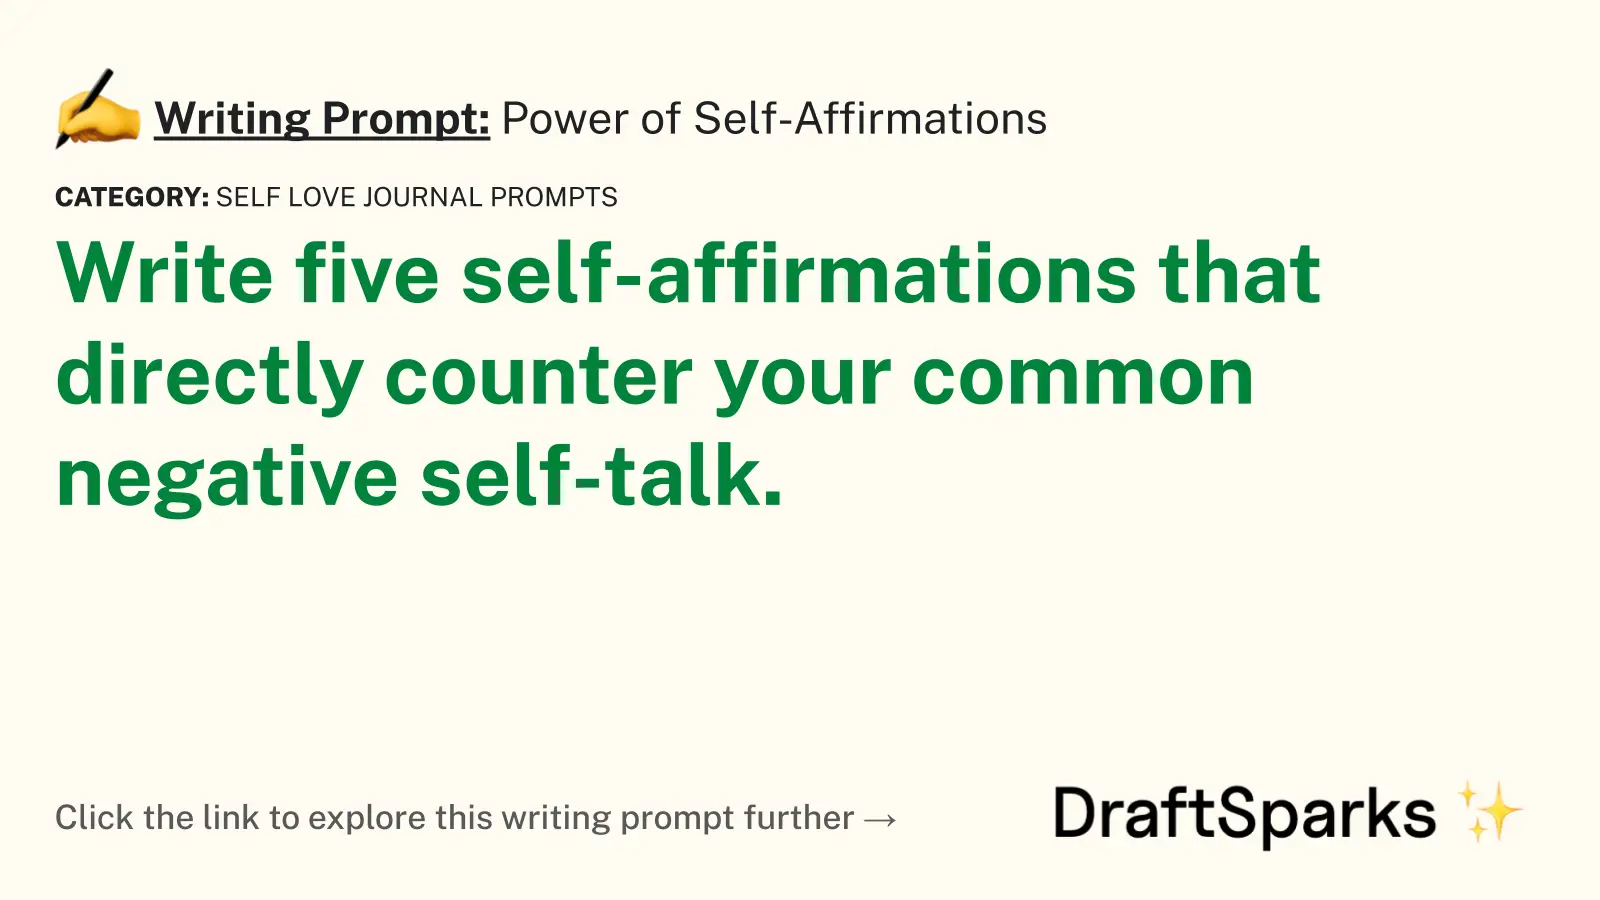 Power of Self-Affirmations